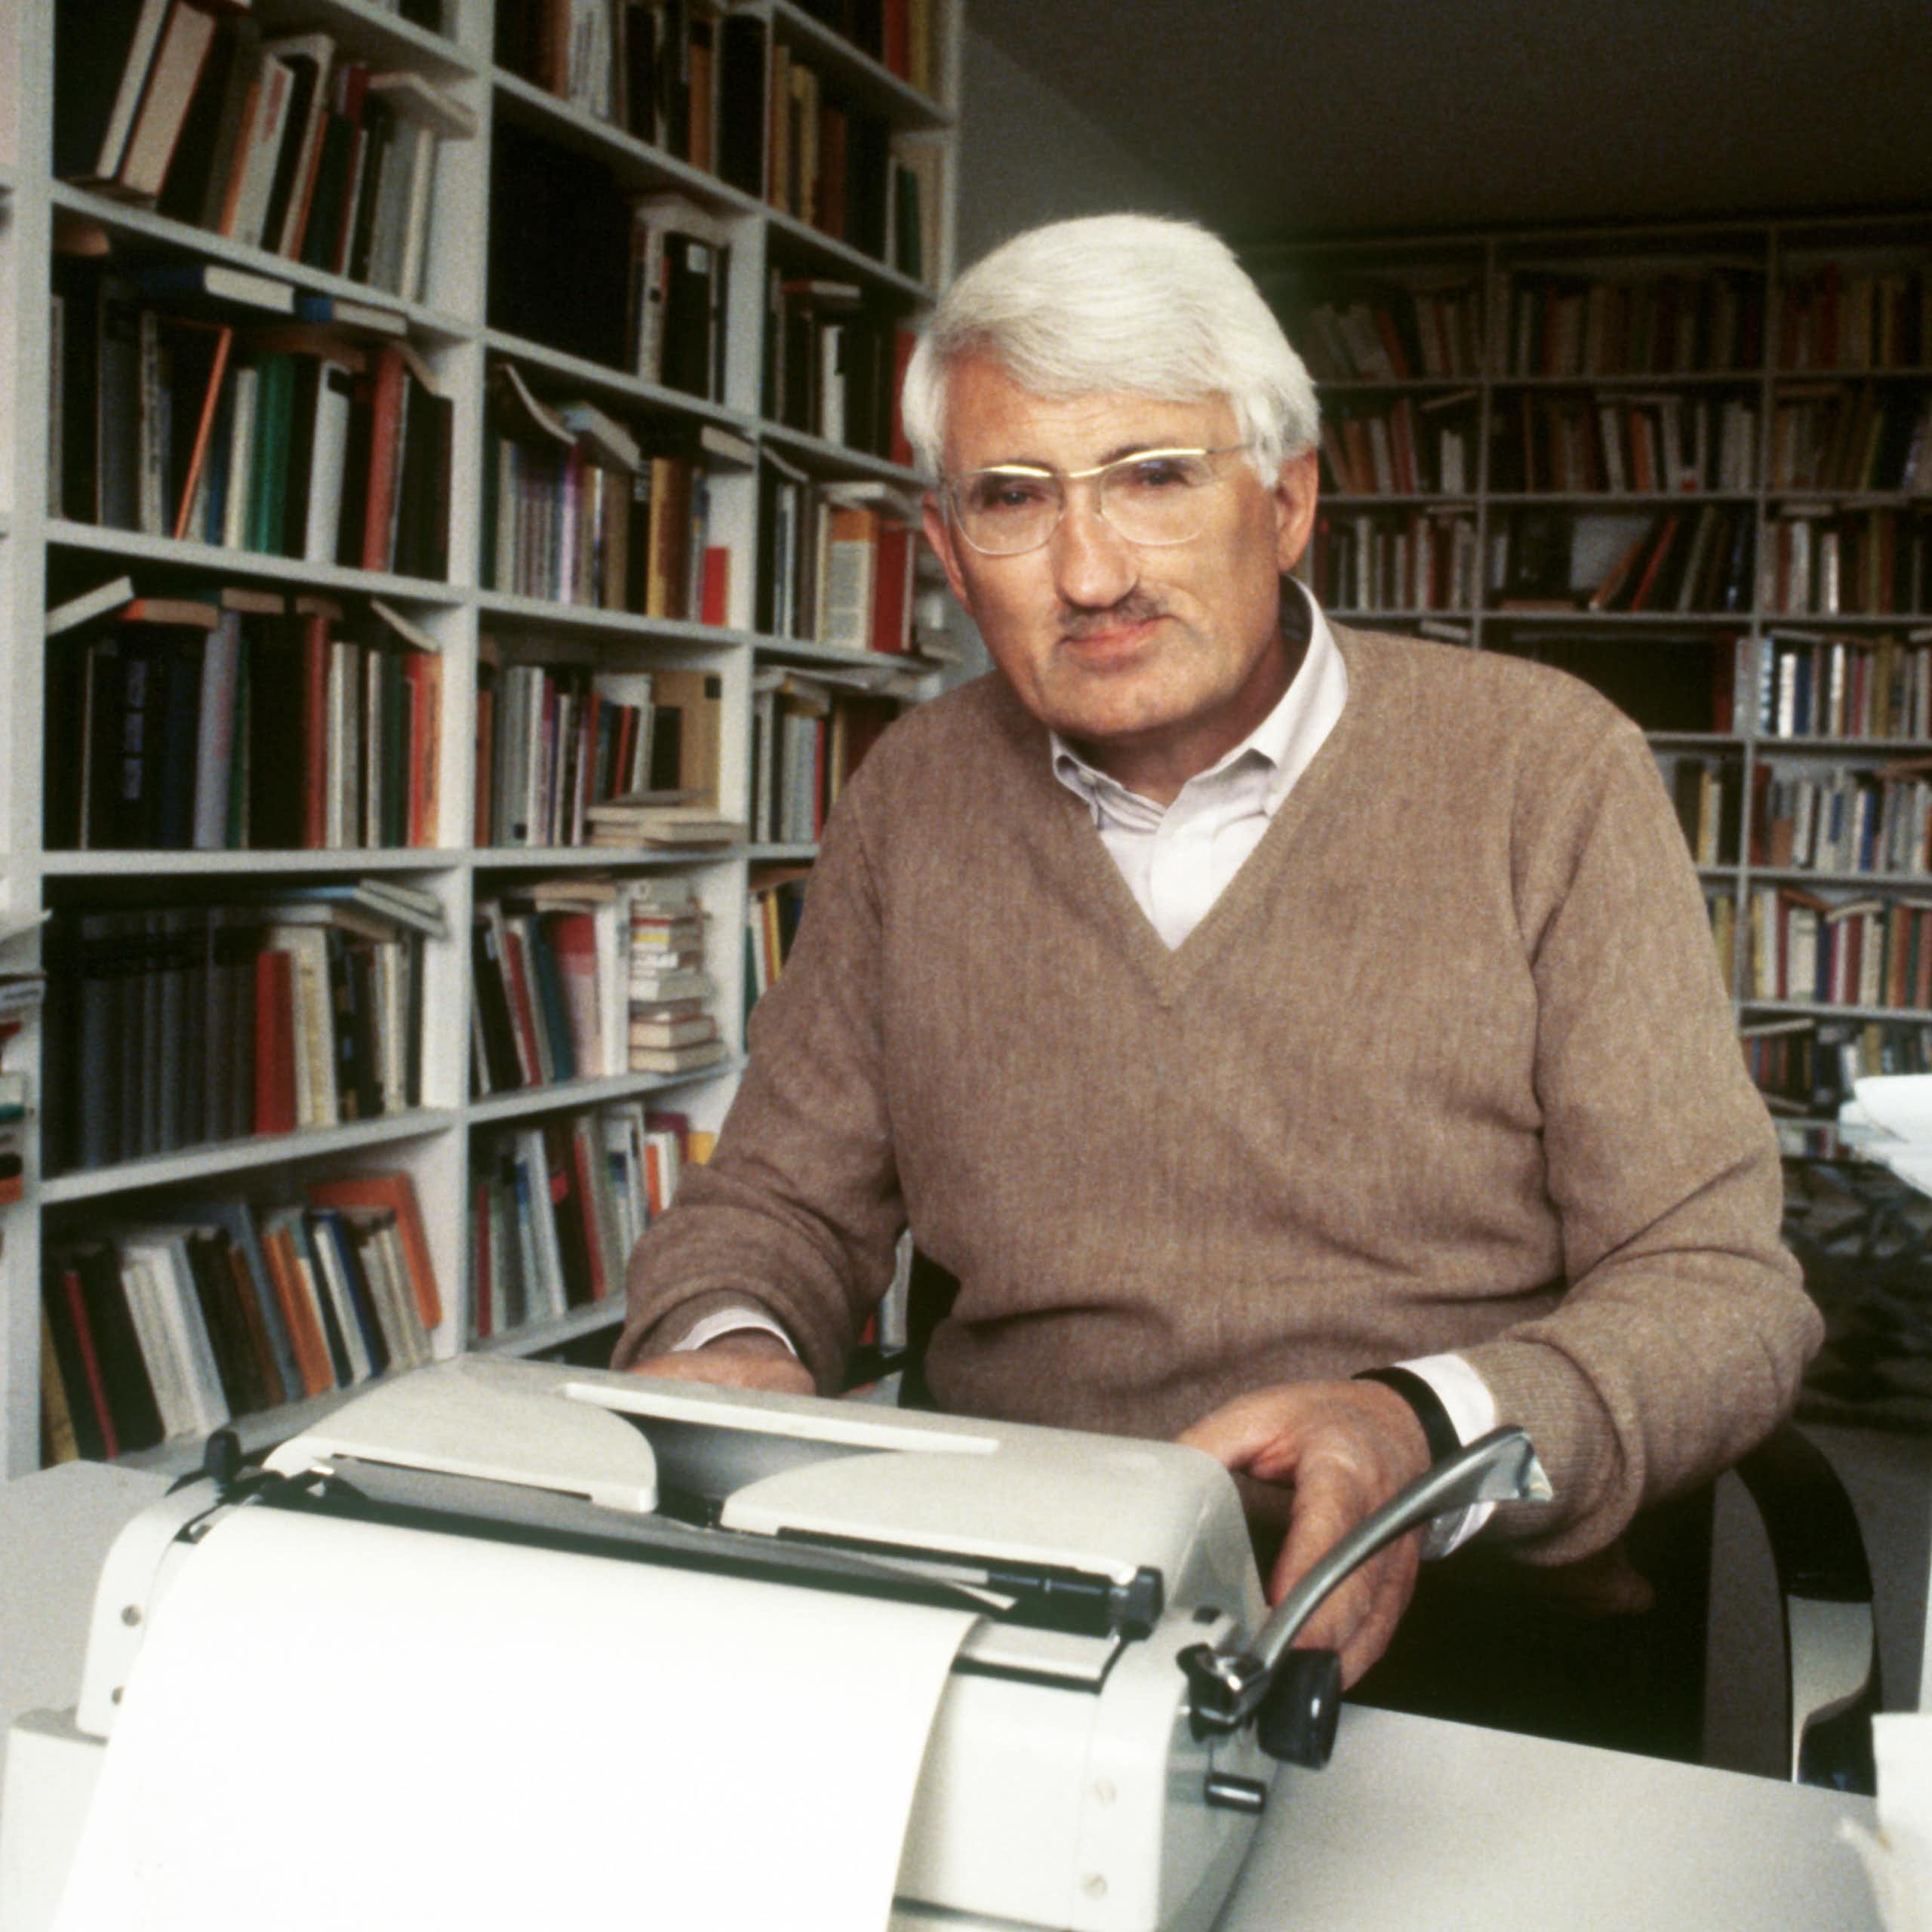 Man at his typewriter in a book-lined room.